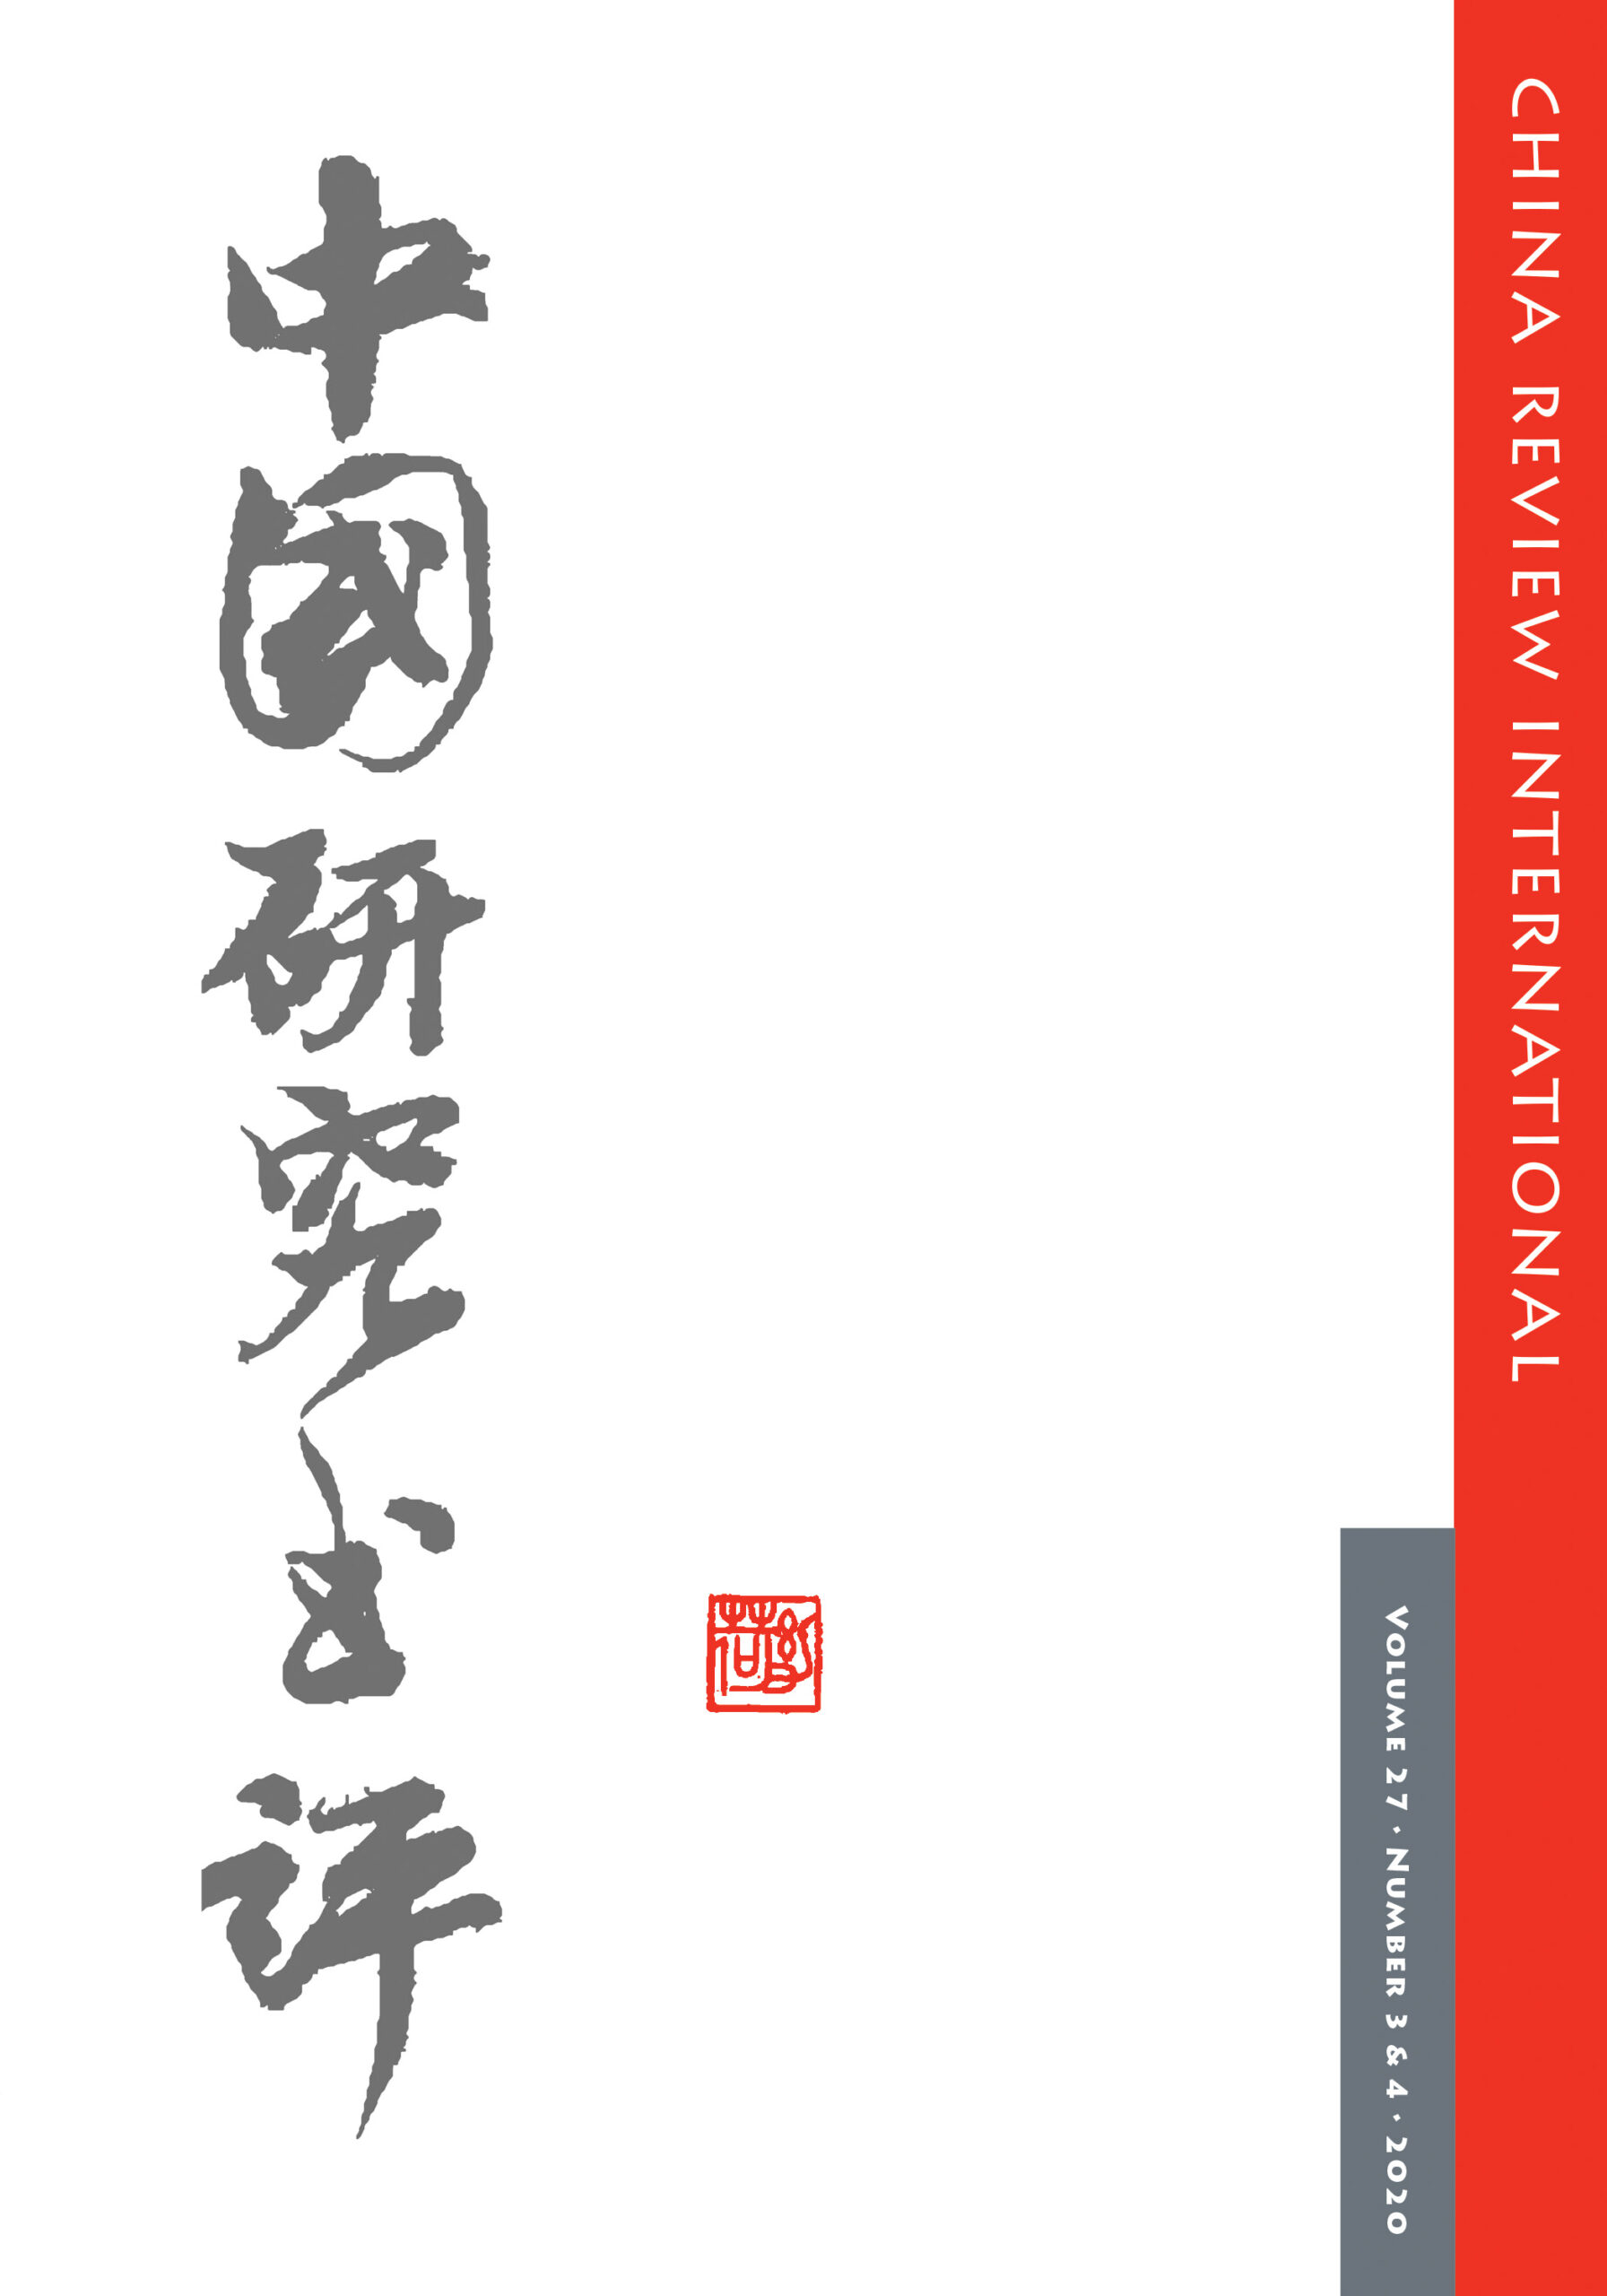 Reviews　Journal　in　UH　–　A　of　Studies　Chinese　Review　Literature　Press　of　International:　China　Scholarly